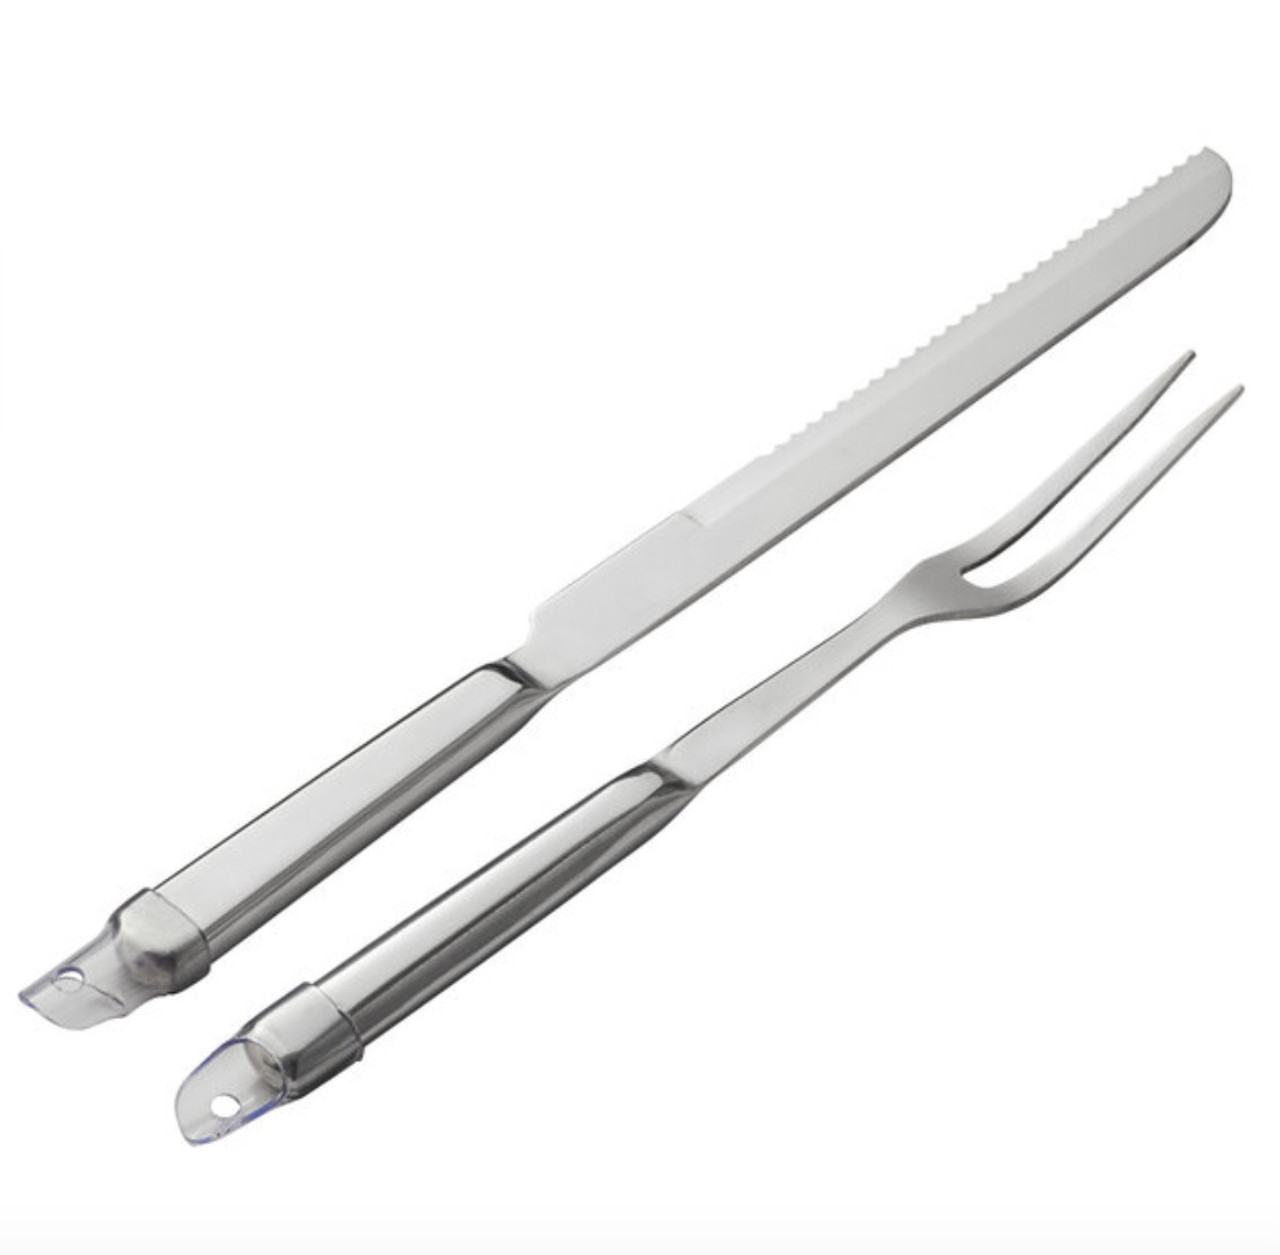 Stainless Steel Handle Carving Set, 2-Piece Hollow 